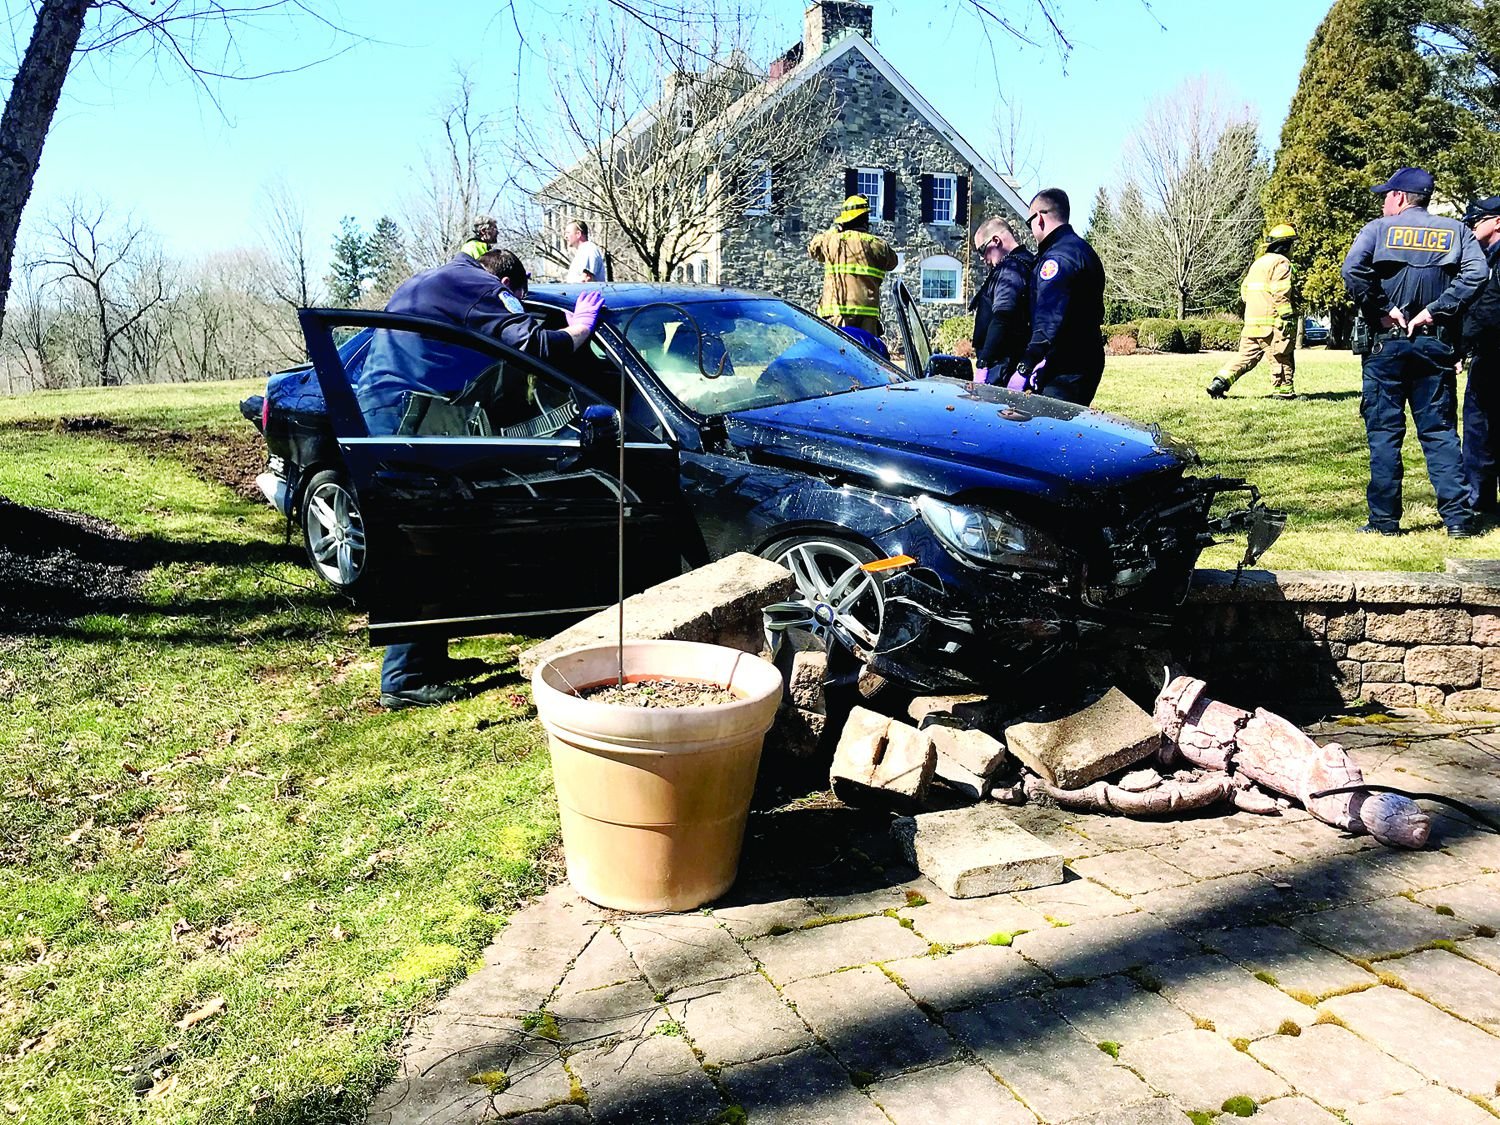 Solebury Police and emergency services crews investigate the scene of a crash that seriously injured two people when this car ran off the road, became airborne and came to rest along a patio wall in Fox Run Preserve. Tire tracks can be seen in the grass behind the car. Photograph by Kristy Smith.